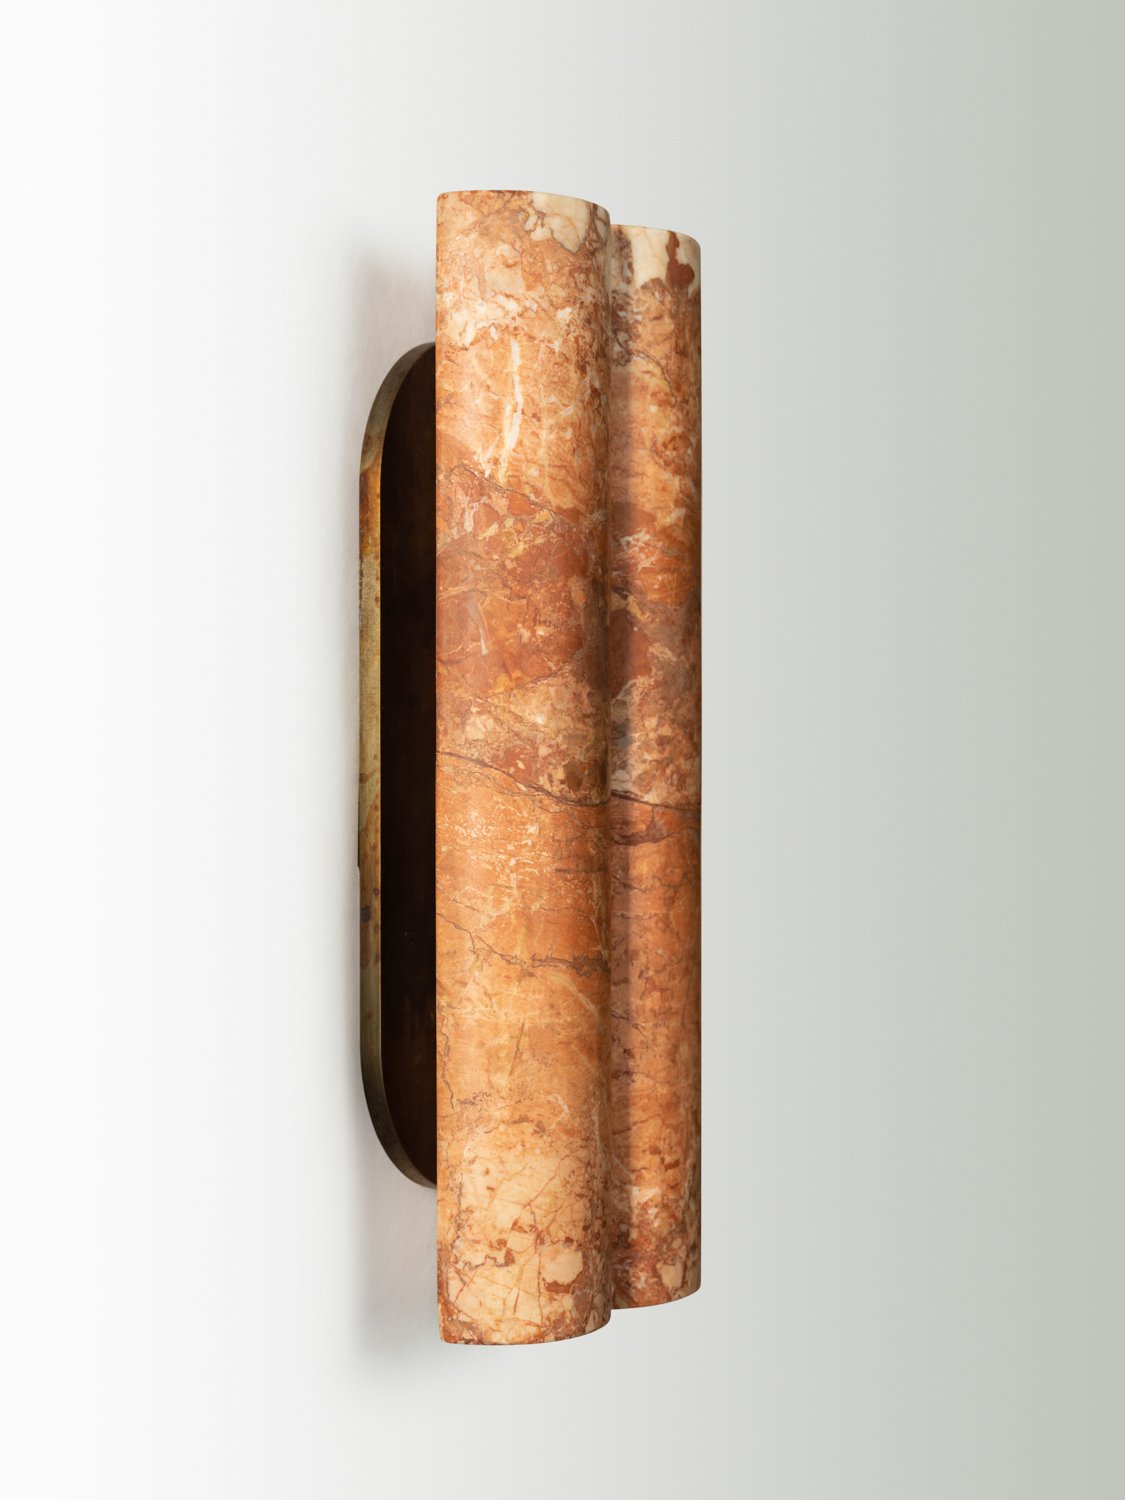  Onna Sconce in Breccia Pernice and House Patina’d Steel. 